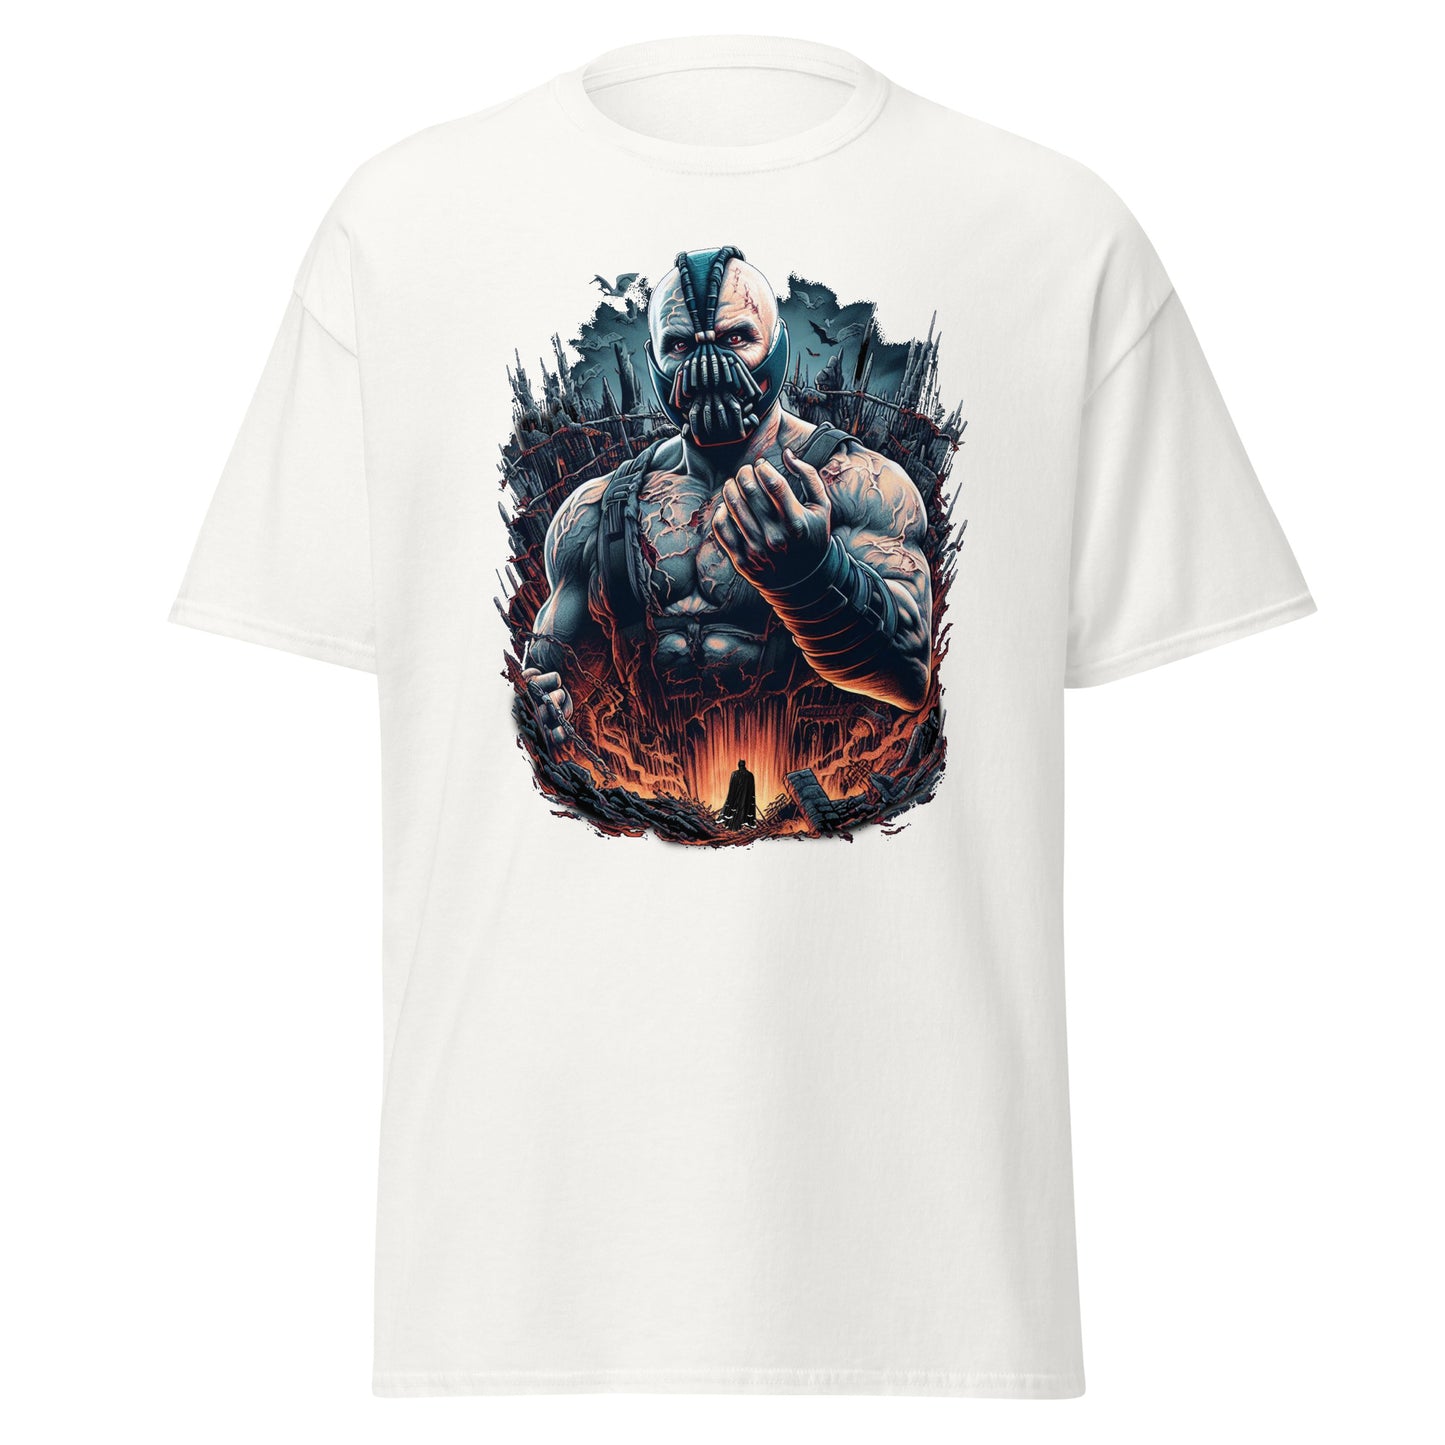 Rise with Bane – Dominance in Every Thread with our T-Shirt Collection